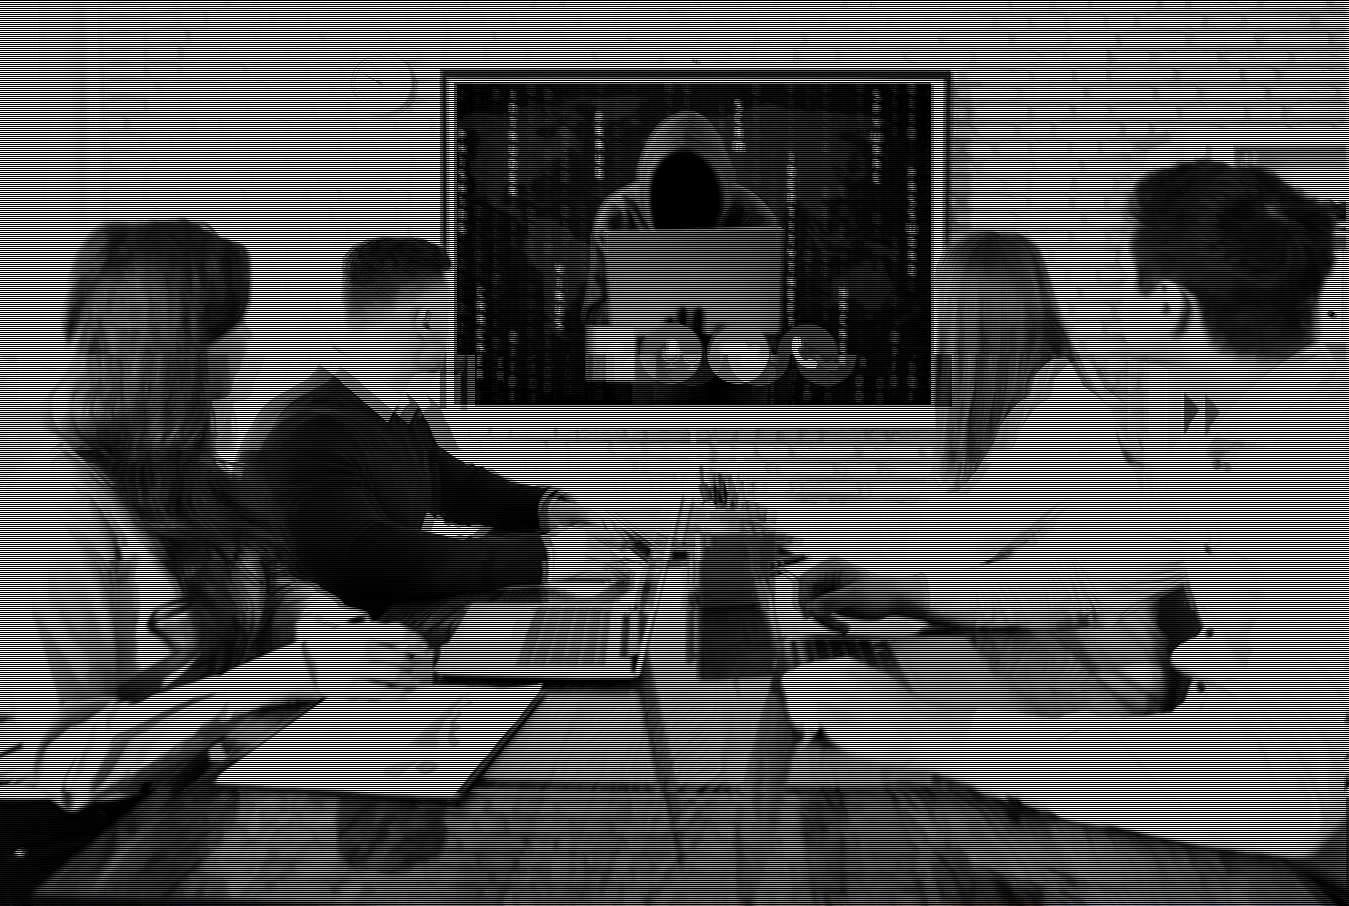 Critical zero-day vulnerabilities hit Lifesize video conferencing products